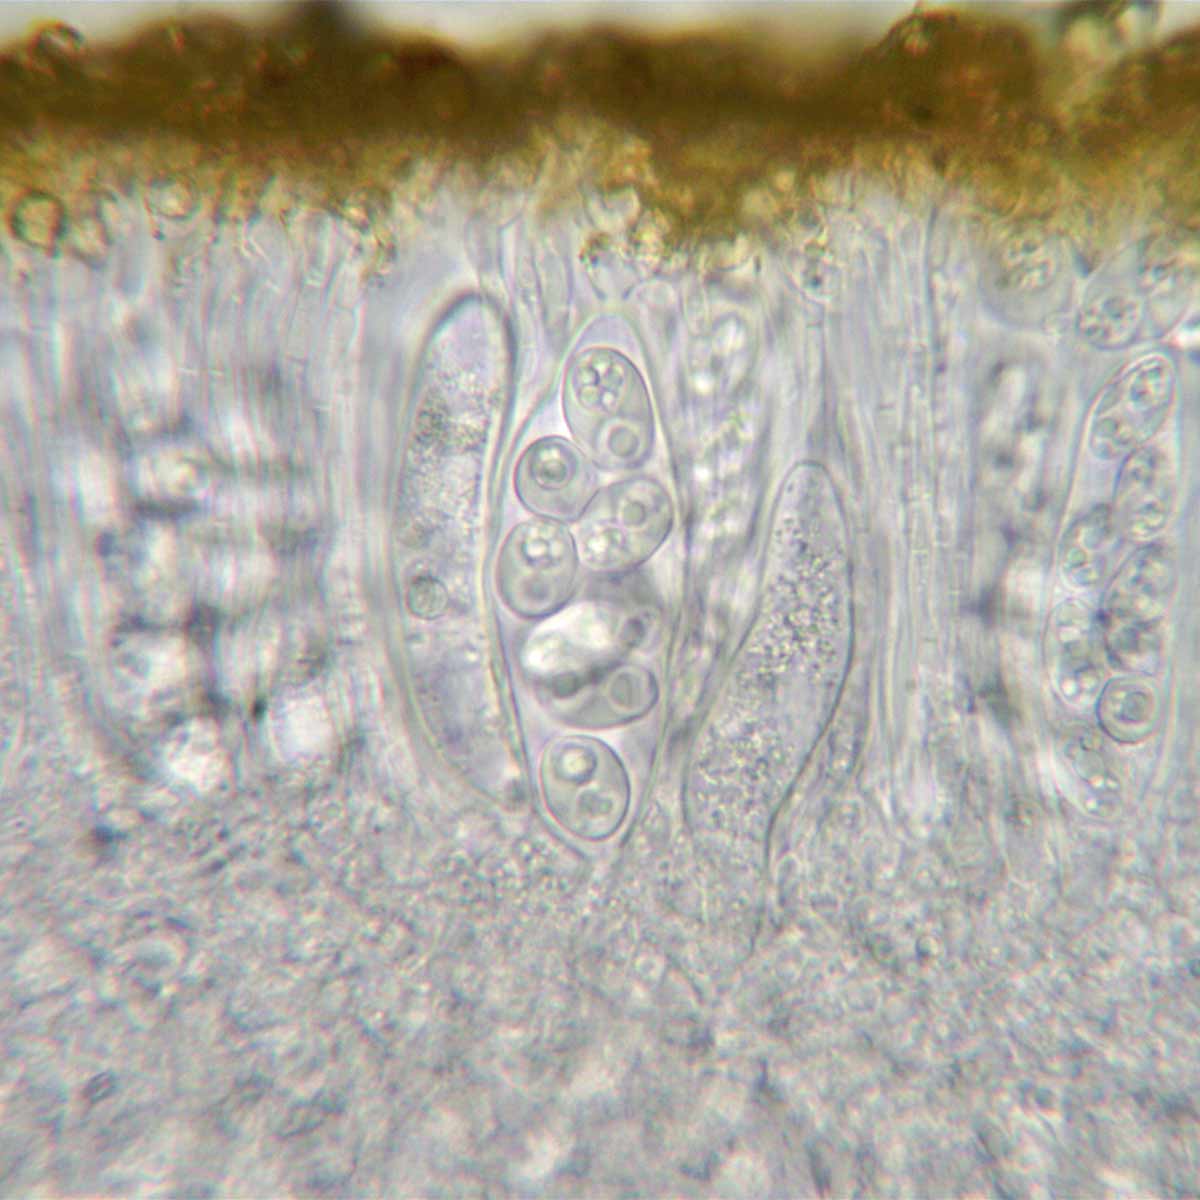 First here is a section through the hymenium mounted in water. An impression of spores within the asci can be seen below the surface layer of orange brown granules.